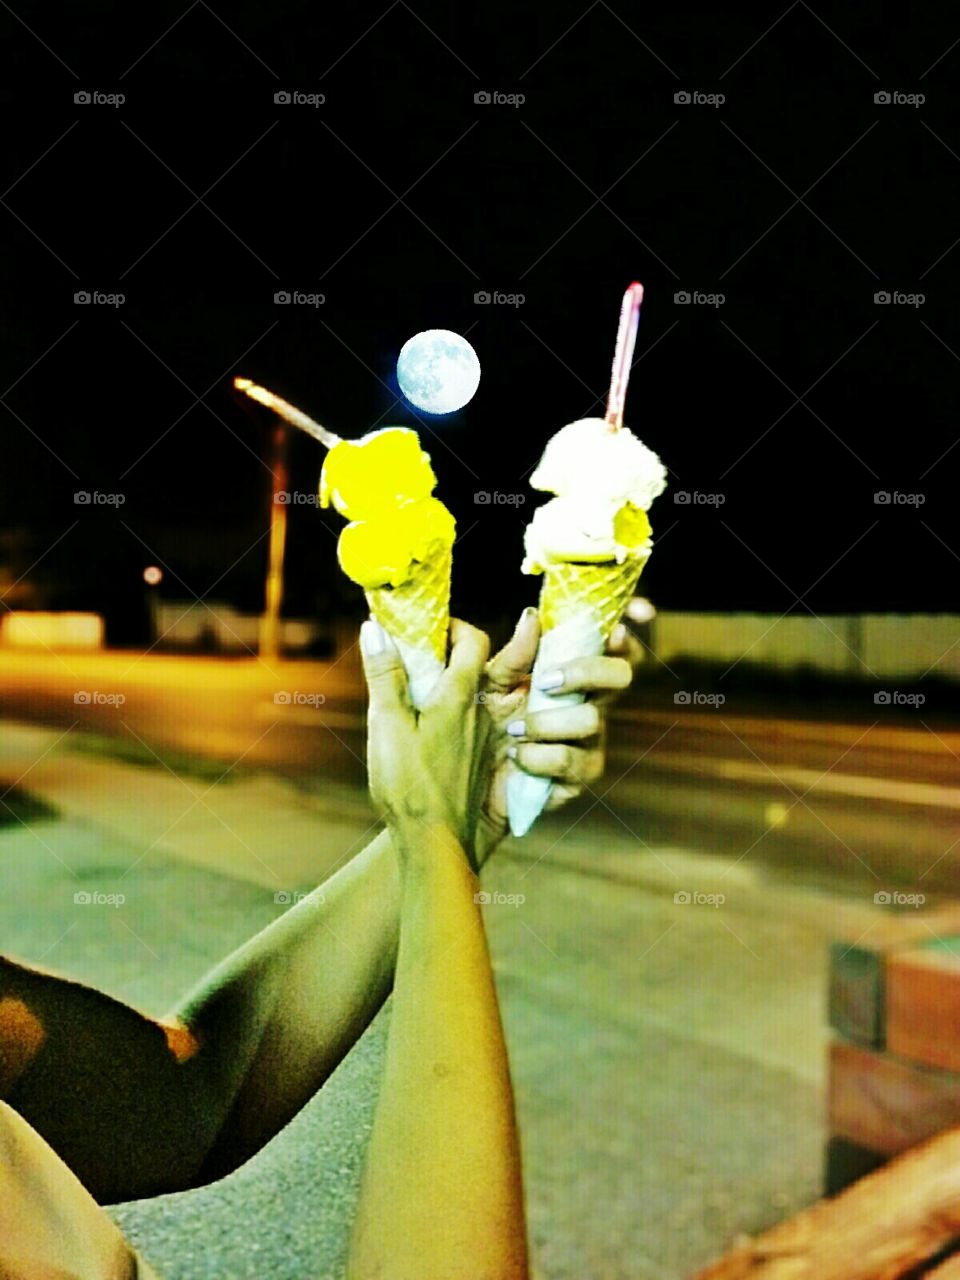 Gelato under the full moon. Once upon a blue moon, two lovers went for Exotica and a Mango gelato. Guess which one is which?